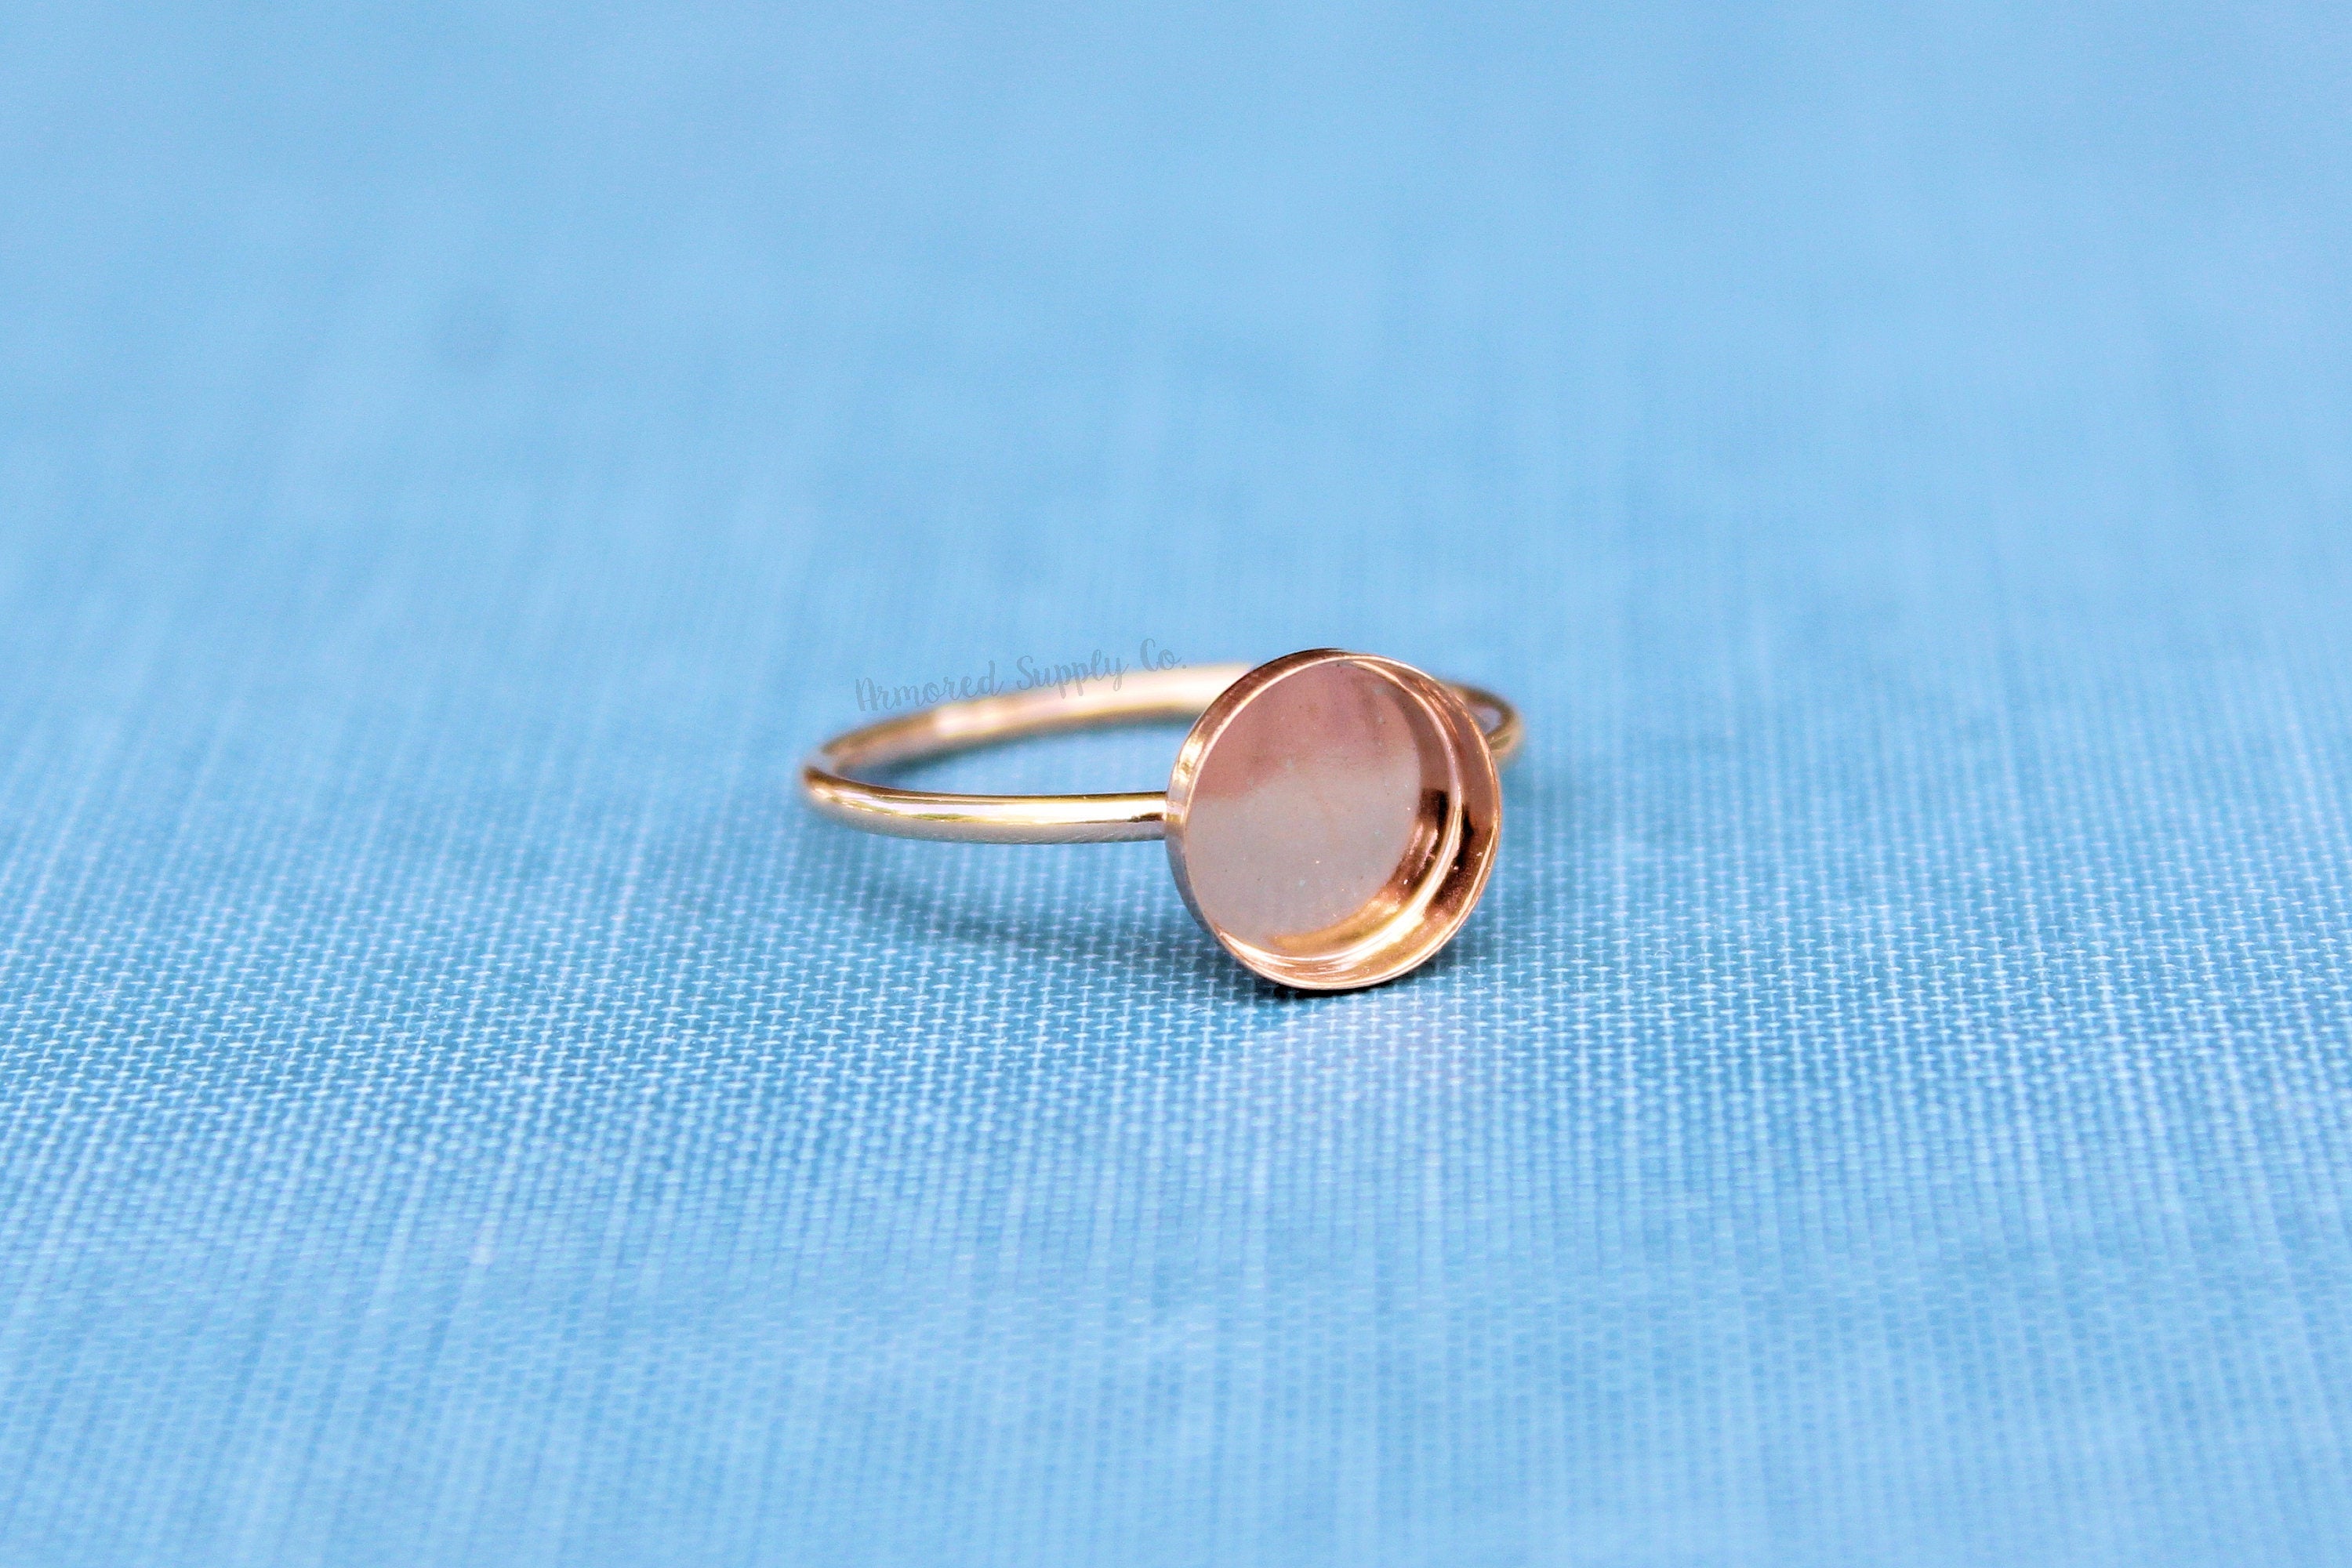 Rose Gold Filled 8mm Bezel Cup Ring blank, Round Cabochon, Breast Milk, DIY jewelry supplies, build your ring, wholesale jewelry, diy ring